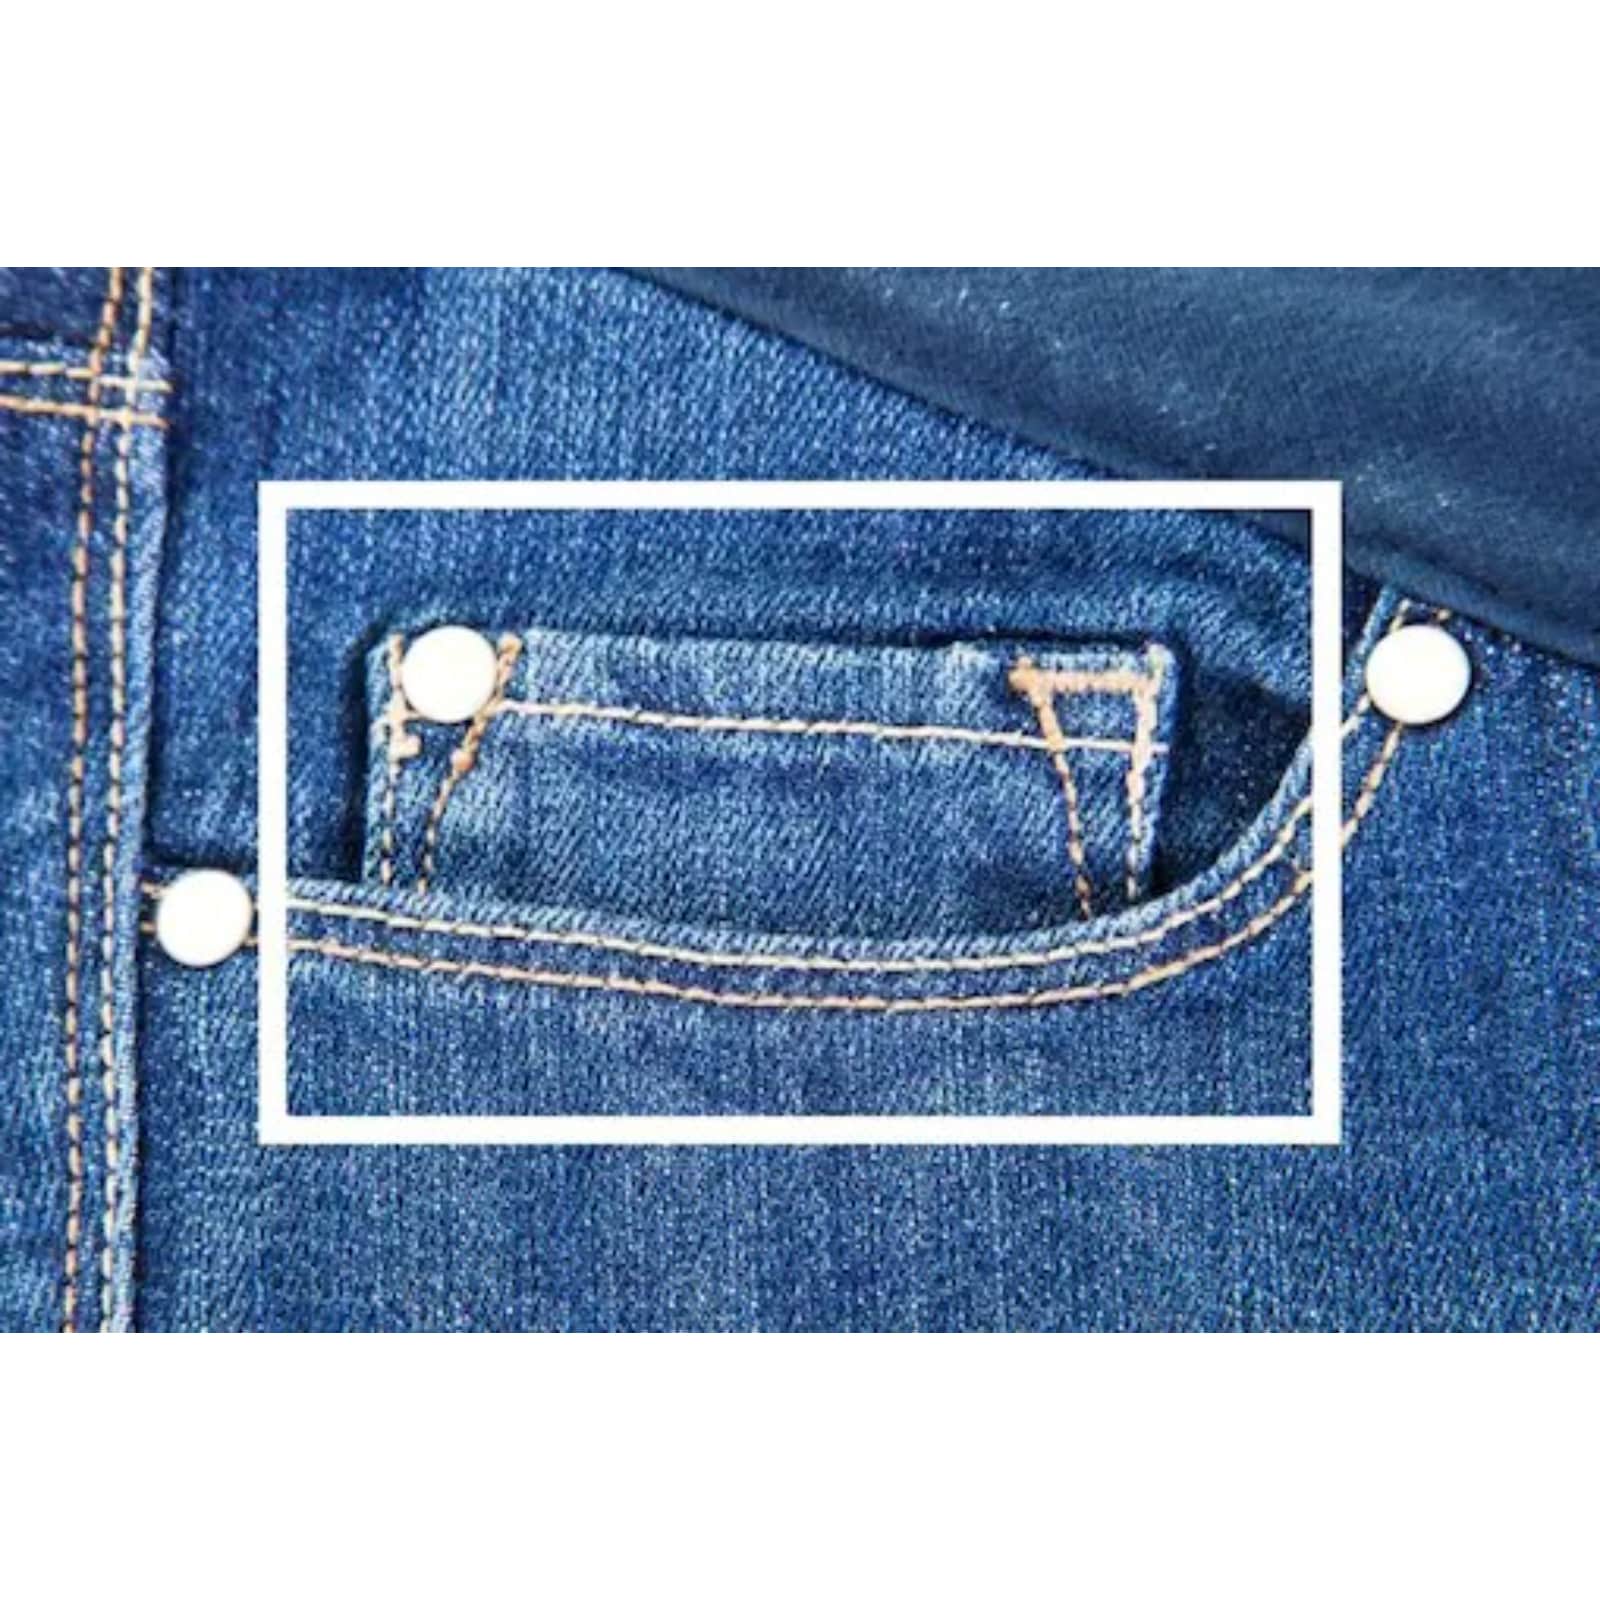 Why do Our Jeans Still Have Small Pockets? Here's Century-old